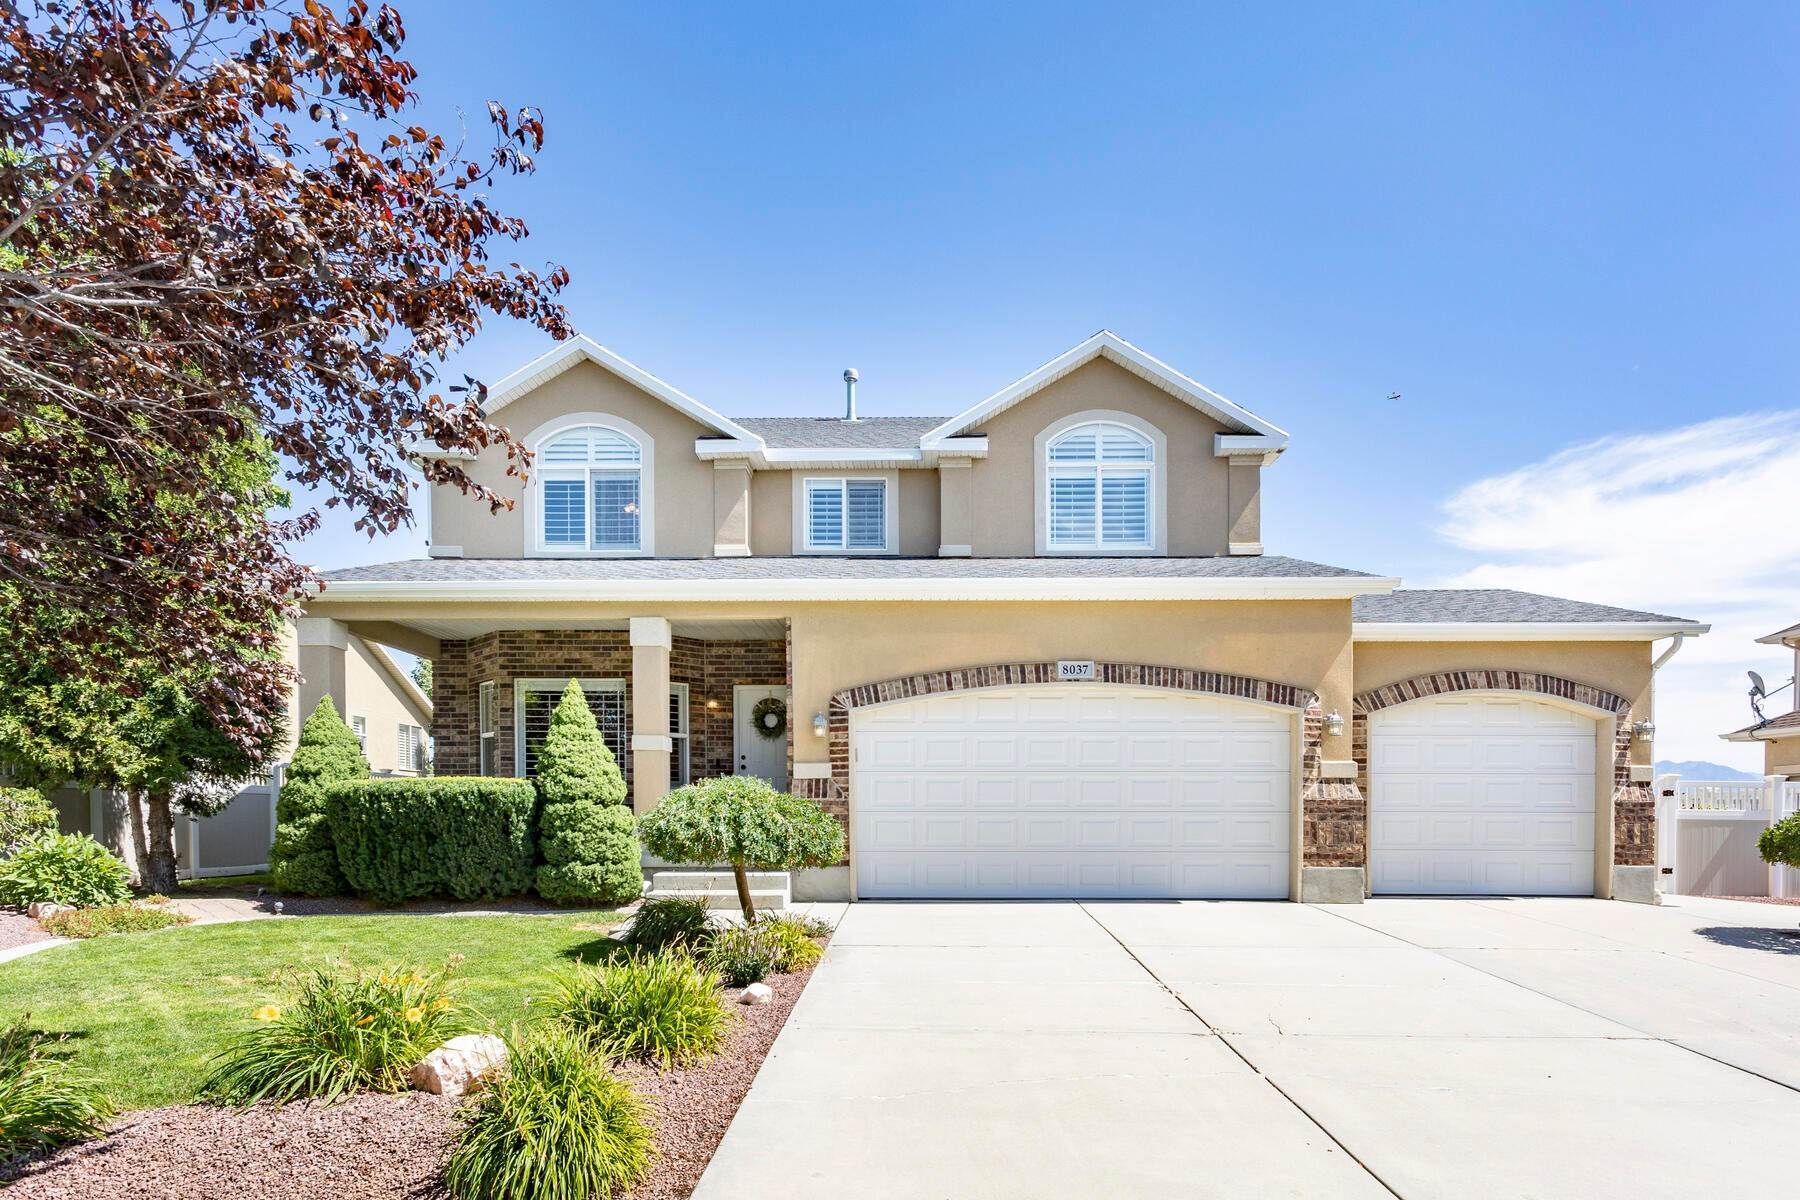 Single Family Homes for Sale at Meticulously Updated 2-Story with Room for Growth 8037 S Big Spring Dr West Jordan, Utah 84081 United States